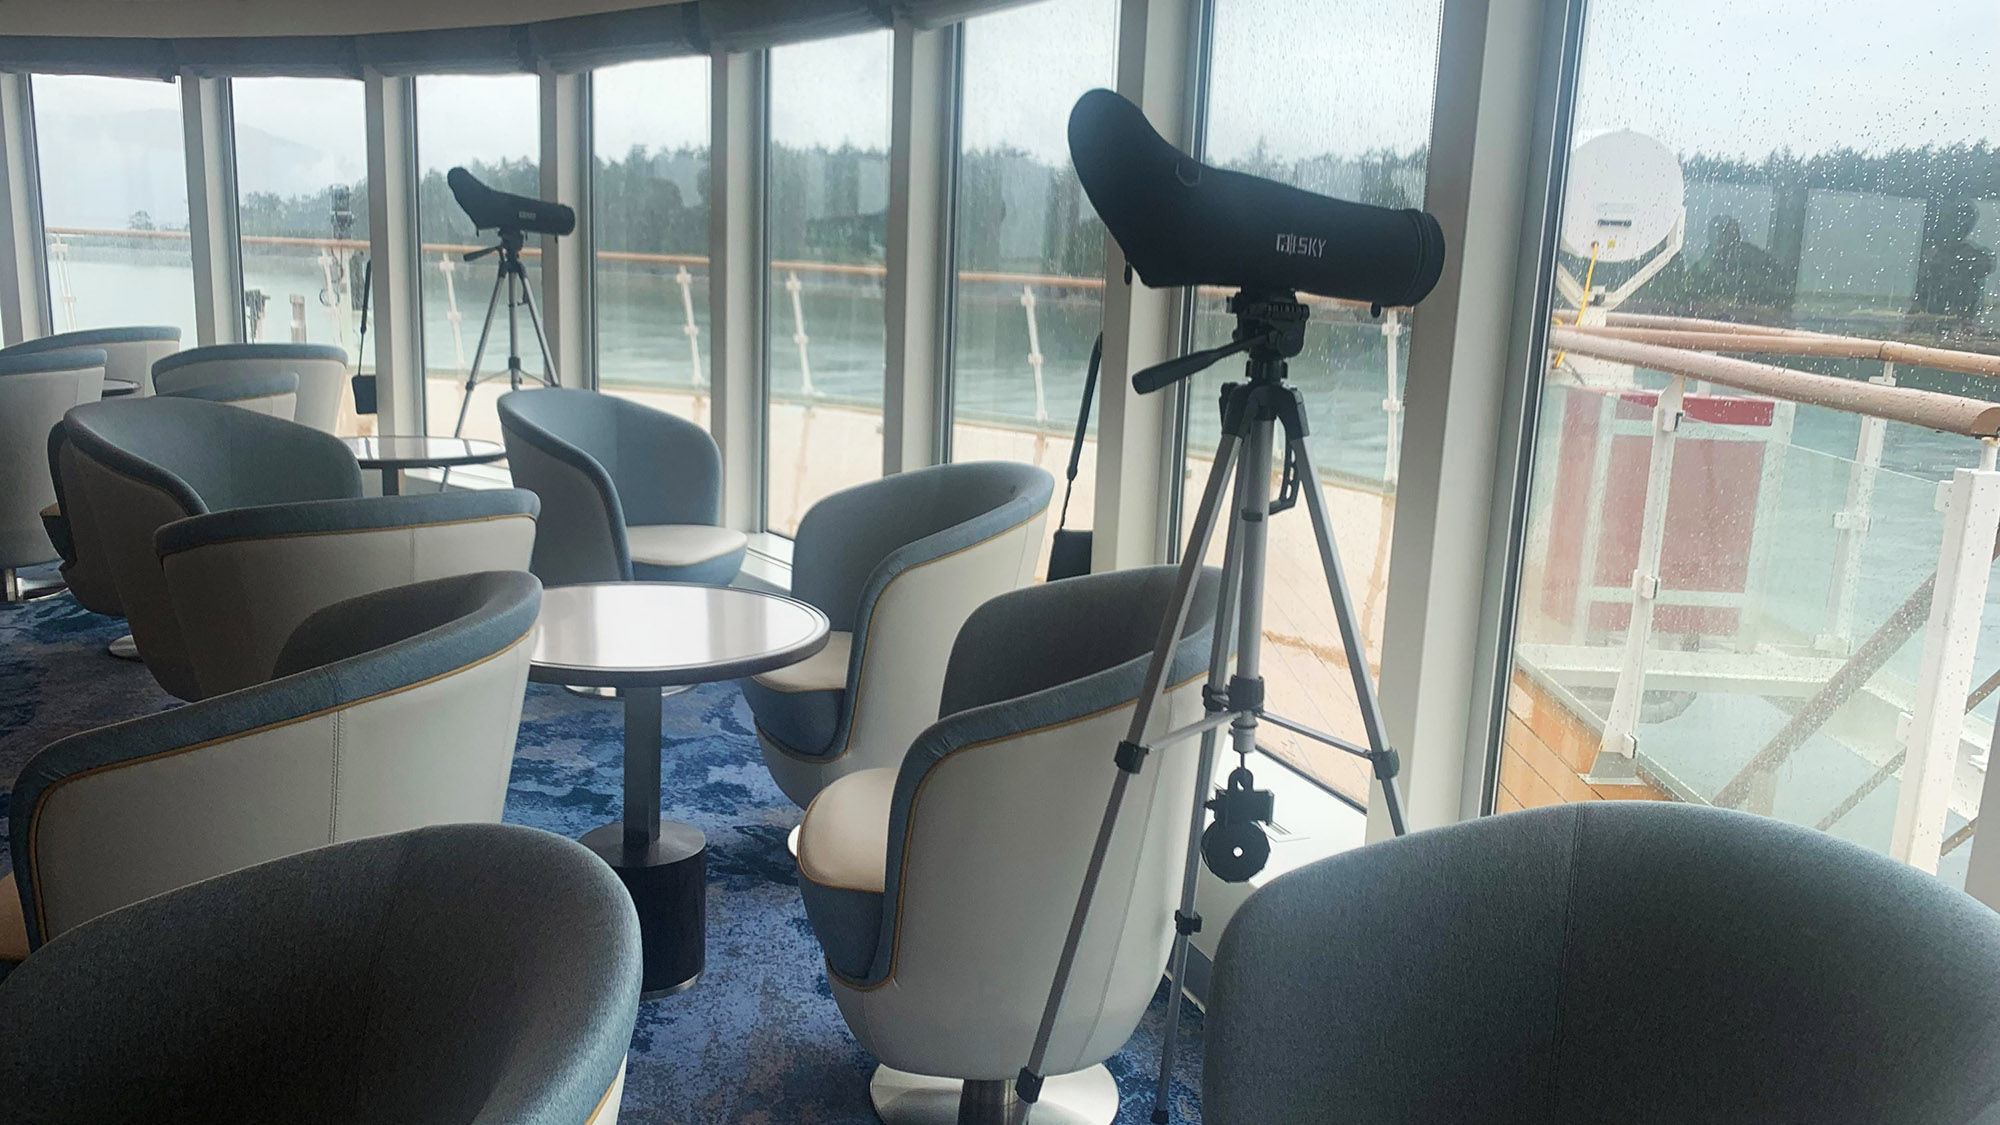 Spotting scopes and binoculars are situated around the Ocean Victory.